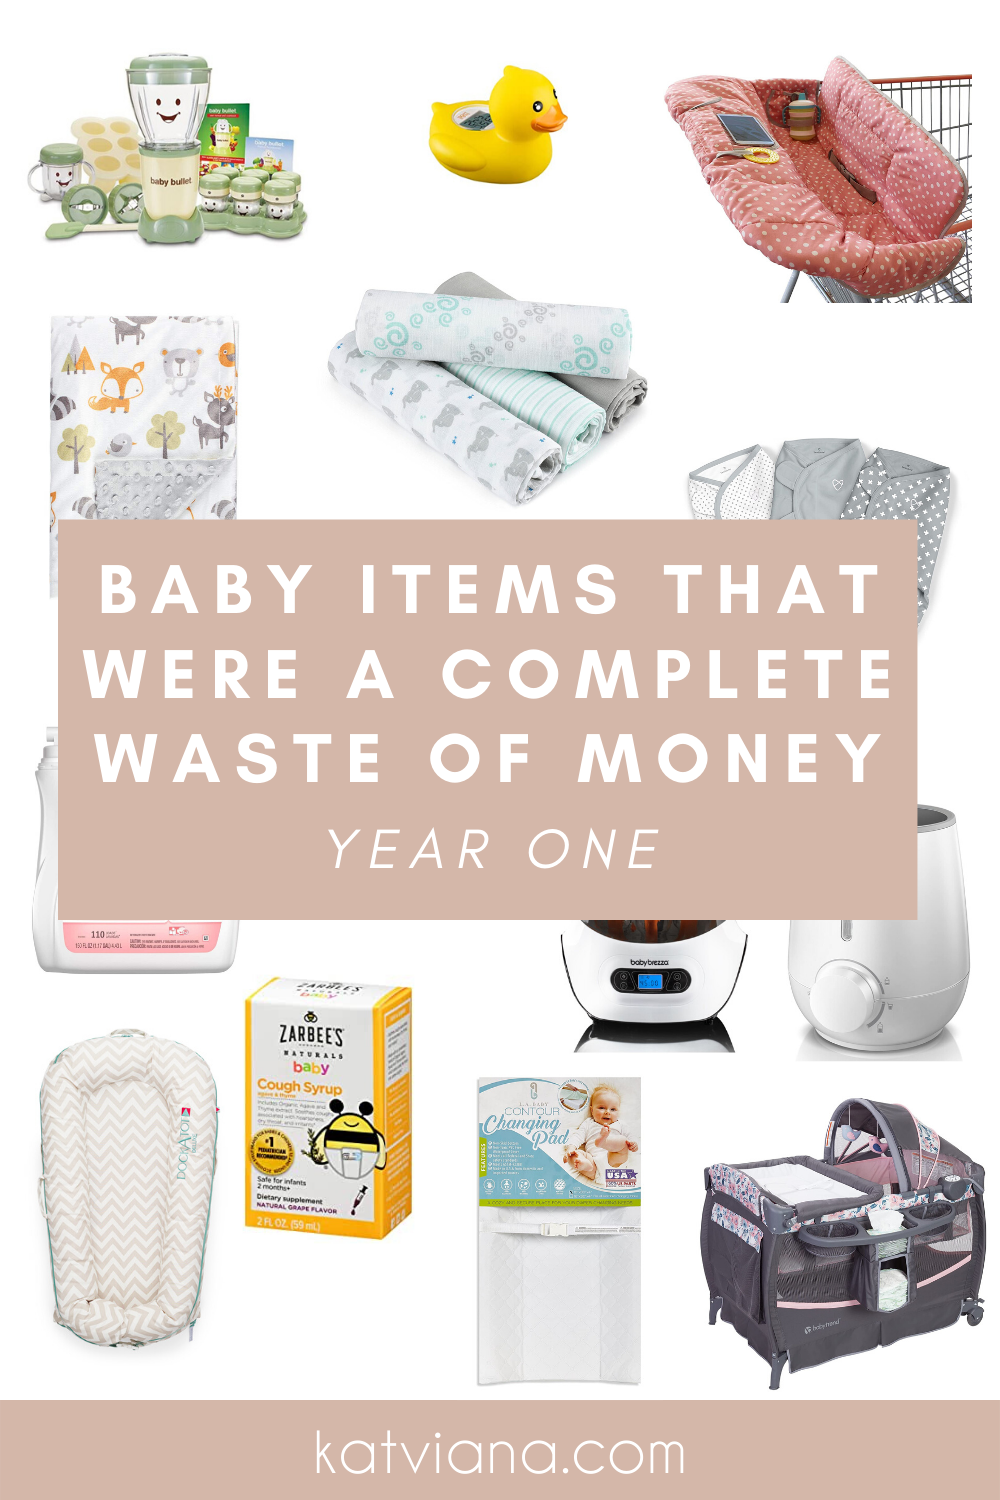 Baby items that were a complete waste of money: year 1 | Kat Viana